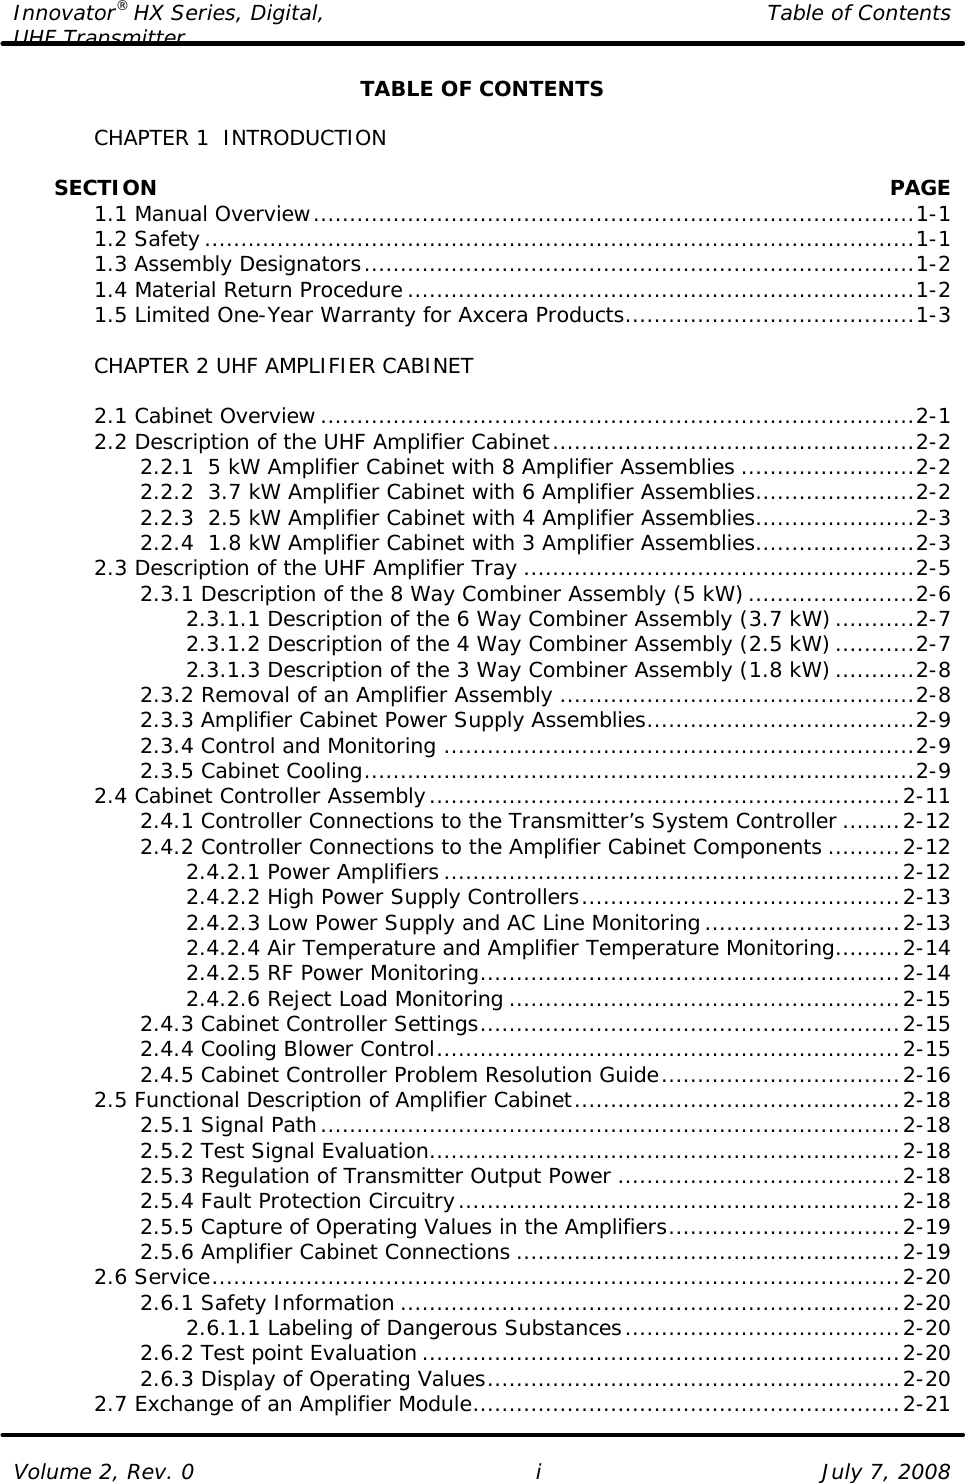 Innovator® HX Series, Digital, Table of Contents UHF Transmitter  Volume 2, Rev. 0 i July 7, 2008 TABLE OF CONTENTS   CHAPTER 1  INTRODUCTION        SECTION    PAGE  1.1 Manual Overview...................................................................................1-1  1.2 Safety..................................................................................................1-1  1.3 Assembly Designators............................................................................1-2  1.4 Material Return Procedure ......................................................................1-2  1.5 Limited One-Year Warranty for Axcera Products........................................1-3   CHAPTER 2 UHF AMPLIFIER CABINET   2.1 Cabinet Overview ..................................................................................2-1  2.2 Description of the UHF Amplifier Cabinet..................................................2-2     2.2.1  5 kW Amplifier Cabinet with 8 Amplifier Assemblies ........................2-2     2.2.2  3.7 kW Amplifier Cabinet with 6 Amplifier Assemblies......................2-2     2.2.3  2.5 kW Amplifier Cabinet with 4 Amplifier Assemblies......................2-3     2.2.4  1.8 kW Amplifier Cabinet with 3 Amplifier Assemblies......................2-3  2.3 Description of the UHF Amplifier Tray ......................................................2-5     2.3.1 Description of the 8 Way Combiner Assembly (5 kW).......................2-6     2.3.1.1 Description of the 6 Way Combiner Assembly (3.7 kW)...........2-7     2.3.1.2 Description of the 4 Way Combiner Assembly (2.5 kW)...........2-7     2.3.1.3 Description of the 3 Way Combiner Assembly (1.8 kW)...........2-8     2.3.2 Removal of an Amplifier Assembly .................................................2-8     2.3.3 Amplifier Cabinet Power Supply Assemblies.....................................2-9     2.3.4 Control and Monitoring .................................................................2-9     2.3.5 Cabinet Cooling............................................................................2-9  2.4 Cabinet Controller Assembly.................................................................2-11     2.4.1 Controller Connections to the Transmitter’s System Controller ........2-12     2.4.2 Controller Connections to the Amplifier Cabinet Components ..........2-12     2.4.2.1 Power Amplifiers ...............................................................2-12     2.4.2.2 High Power Supply Controllers............................................2-13     2.4.2.3 Low Power Supply and AC Line Monitoring...........................2-13     2.4.2.4 Air Temperature and Amplifier Temperature Monitoring.........2-14     2.4.2.5 RF Power Monitoring..........................................................2-14     2.4.2.6 Reject Load Monitoring ......................................................2-15     2.4.3 Cabinet Controller Settings..........................................................2-15     2.4.4 Cooling Blower Control................................................................2-15     2.4.5 Cabinet Controller Problem Resolution Guide.................................2-16  2.5 Functional Description of Amplifier Cabinet.............................................2-18     2.5.1 Signal Path................................................................................2-18     2.5.2 Test Signal Evaluation.................................................................2-18     2.5.3 Regulation of Transmitter Output Power .......................................2-18     2.5.4 Fault Protection Circuitry.............................................................2-18     2.5.5 Capture of Operating Values in the Amplifiers................................2-19     2.5.6 Amplifier Cabinet Connections .....................................................2-19  2.6 Service...............................................................................................2-20     2.6.1 Safety Information .....................................................................2-20     2.6.1.1 Labeling of Dangerous Substances......................................2-20     2.6.2 Test point Evaluation ..................................................................2-20     2.6.3 Display of Operating Values.........................................................2-20  2.7 Exchange of an Amplifier Module...........................................................2-21 